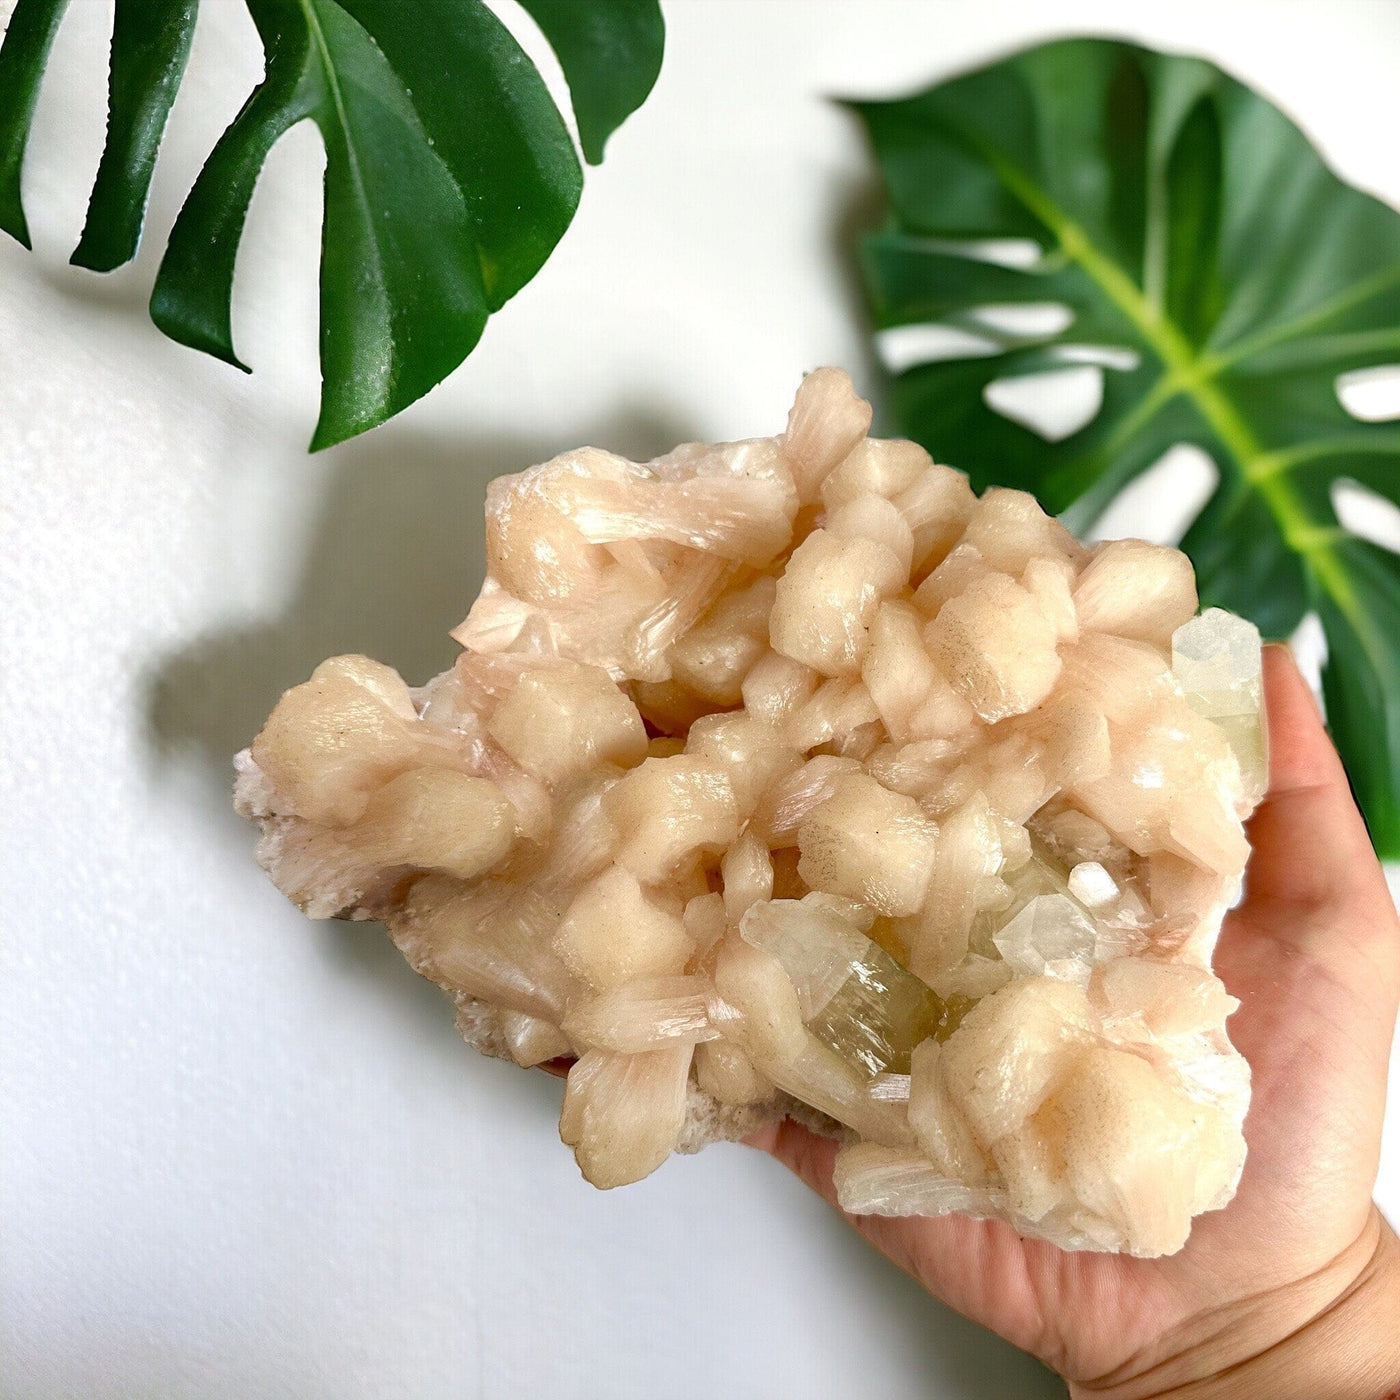 Peach Stilbite with Apophyllite and Zeolite - Museum Quality - Crystal Cluster in hand for size reference with a white wall and monstera leaves in the background